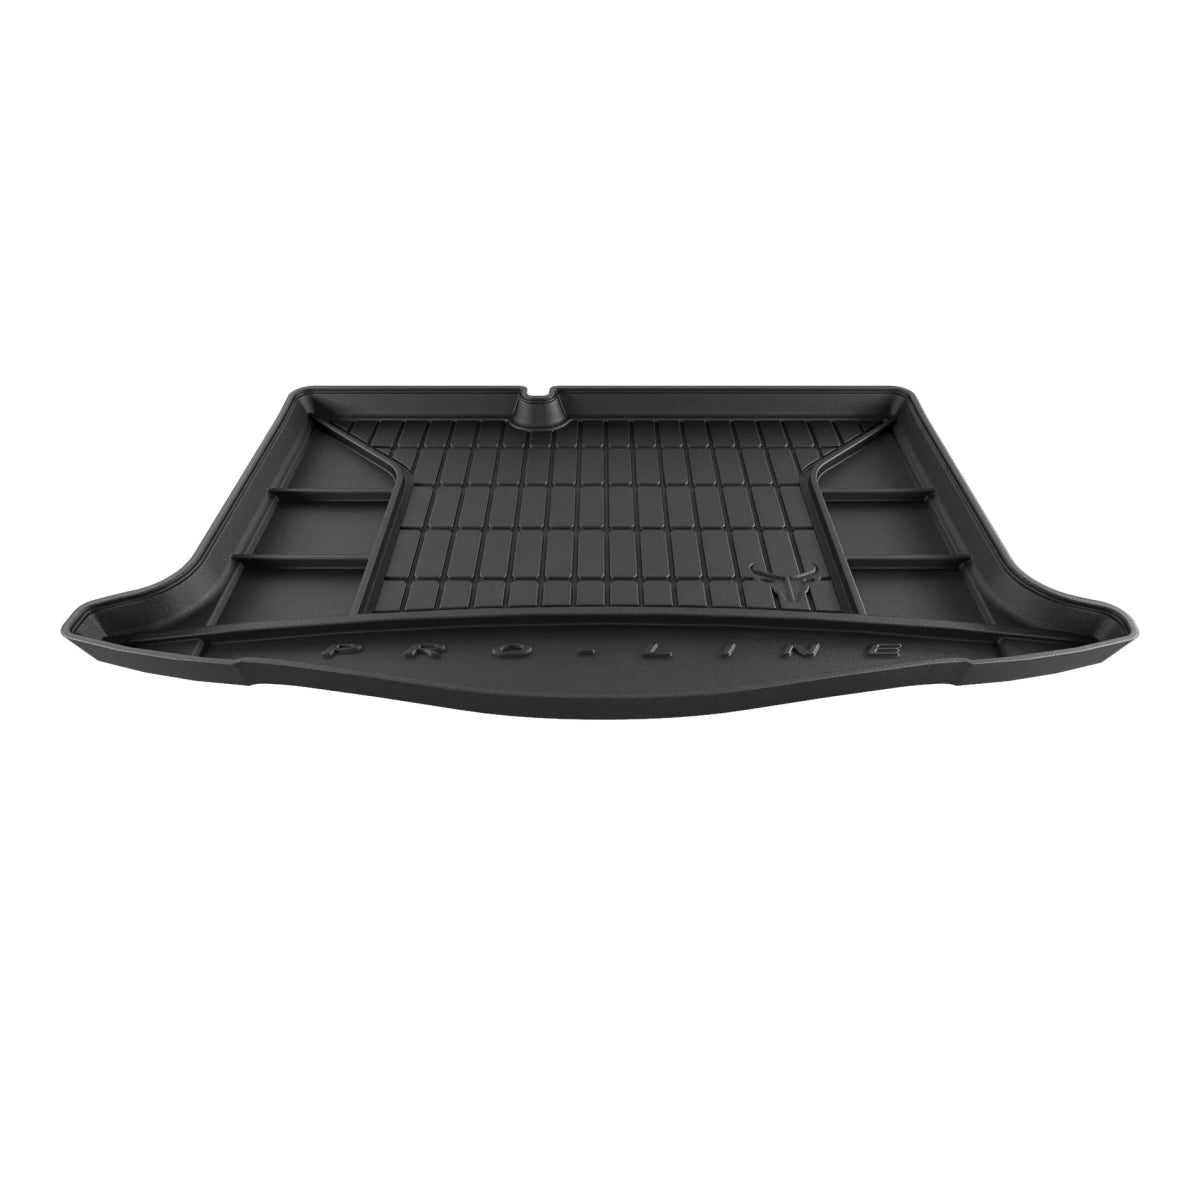 Tailored Car Boot Liner for Nissan - Protect Your Boot from Dirt and Damage - Green Flag Shop